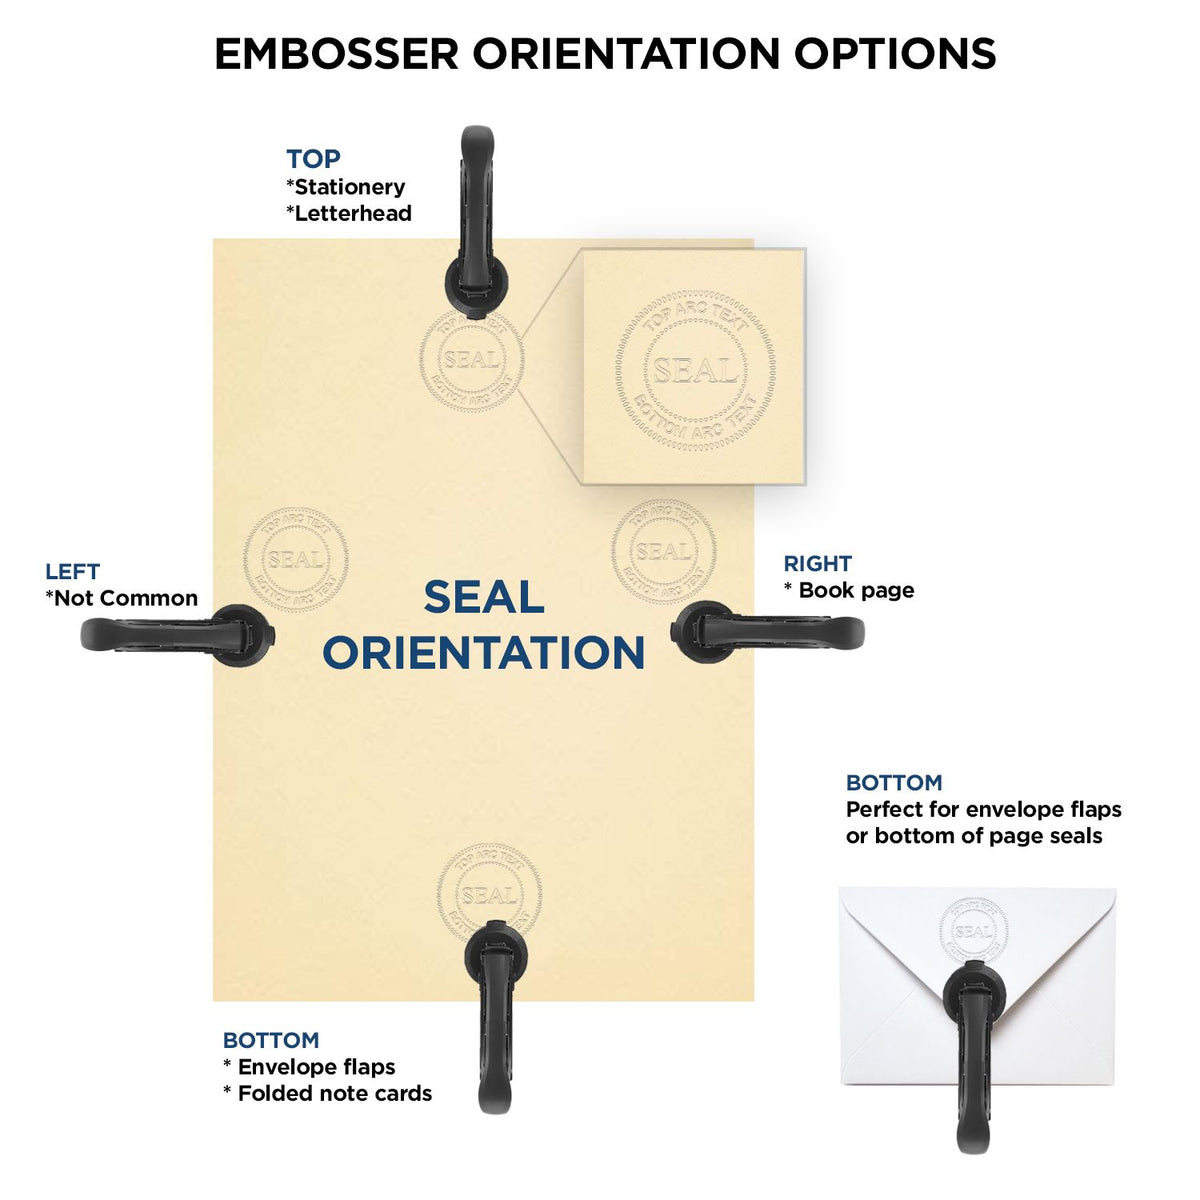 An infographic for the Handheld New Mexico Professional Engineer Embosser showing embosser orientation, this is showing examples of a top, bottom, right and left insert.